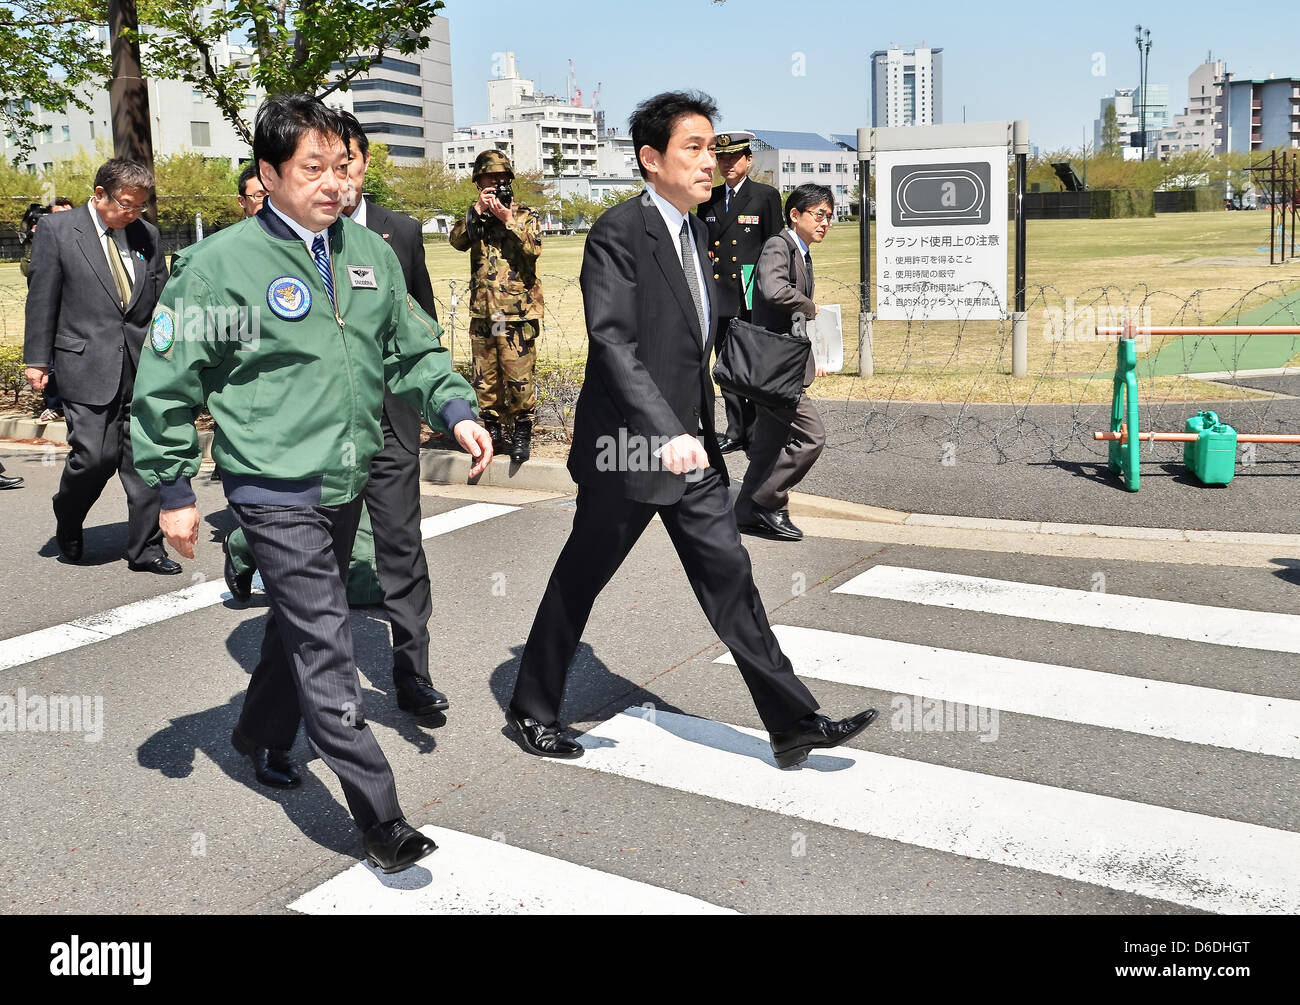 Fumio Kishida, PAC3, April 13, 2013, Tokyo, Japan : Japan's Foreign Minister Fumio Kishida(R) and Defense Minister Itsunori Onodera inspect units of Patriot Advanced Capability-3 (PAC-3) missiles at the Defense Ministry in Tokyo April 13, 2013. (Photo by AFLO) Stock Photo